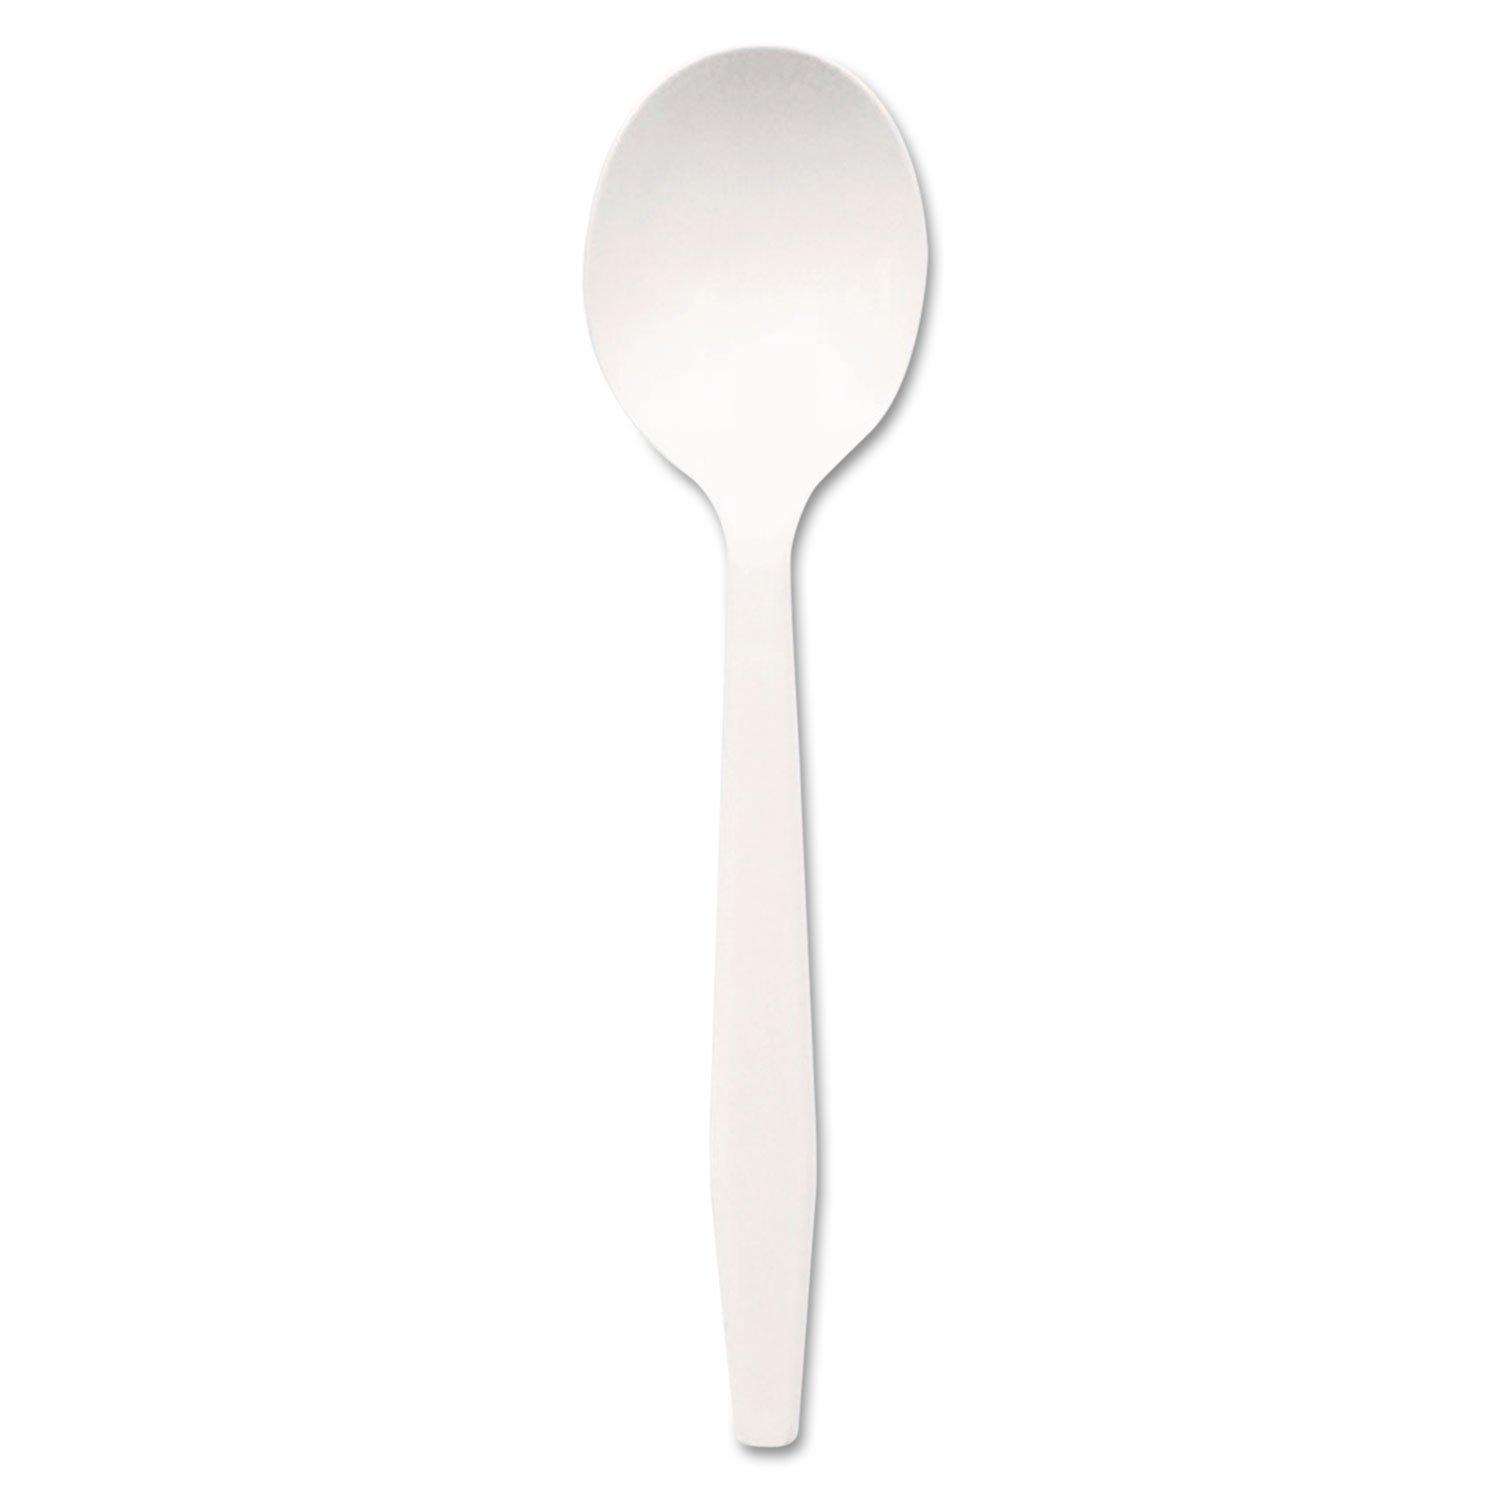  Dixie PSM21 Plastic Cutlery, Mediumweight Soup Spoons, White, 1,000/Carton (DXEPSM21) 